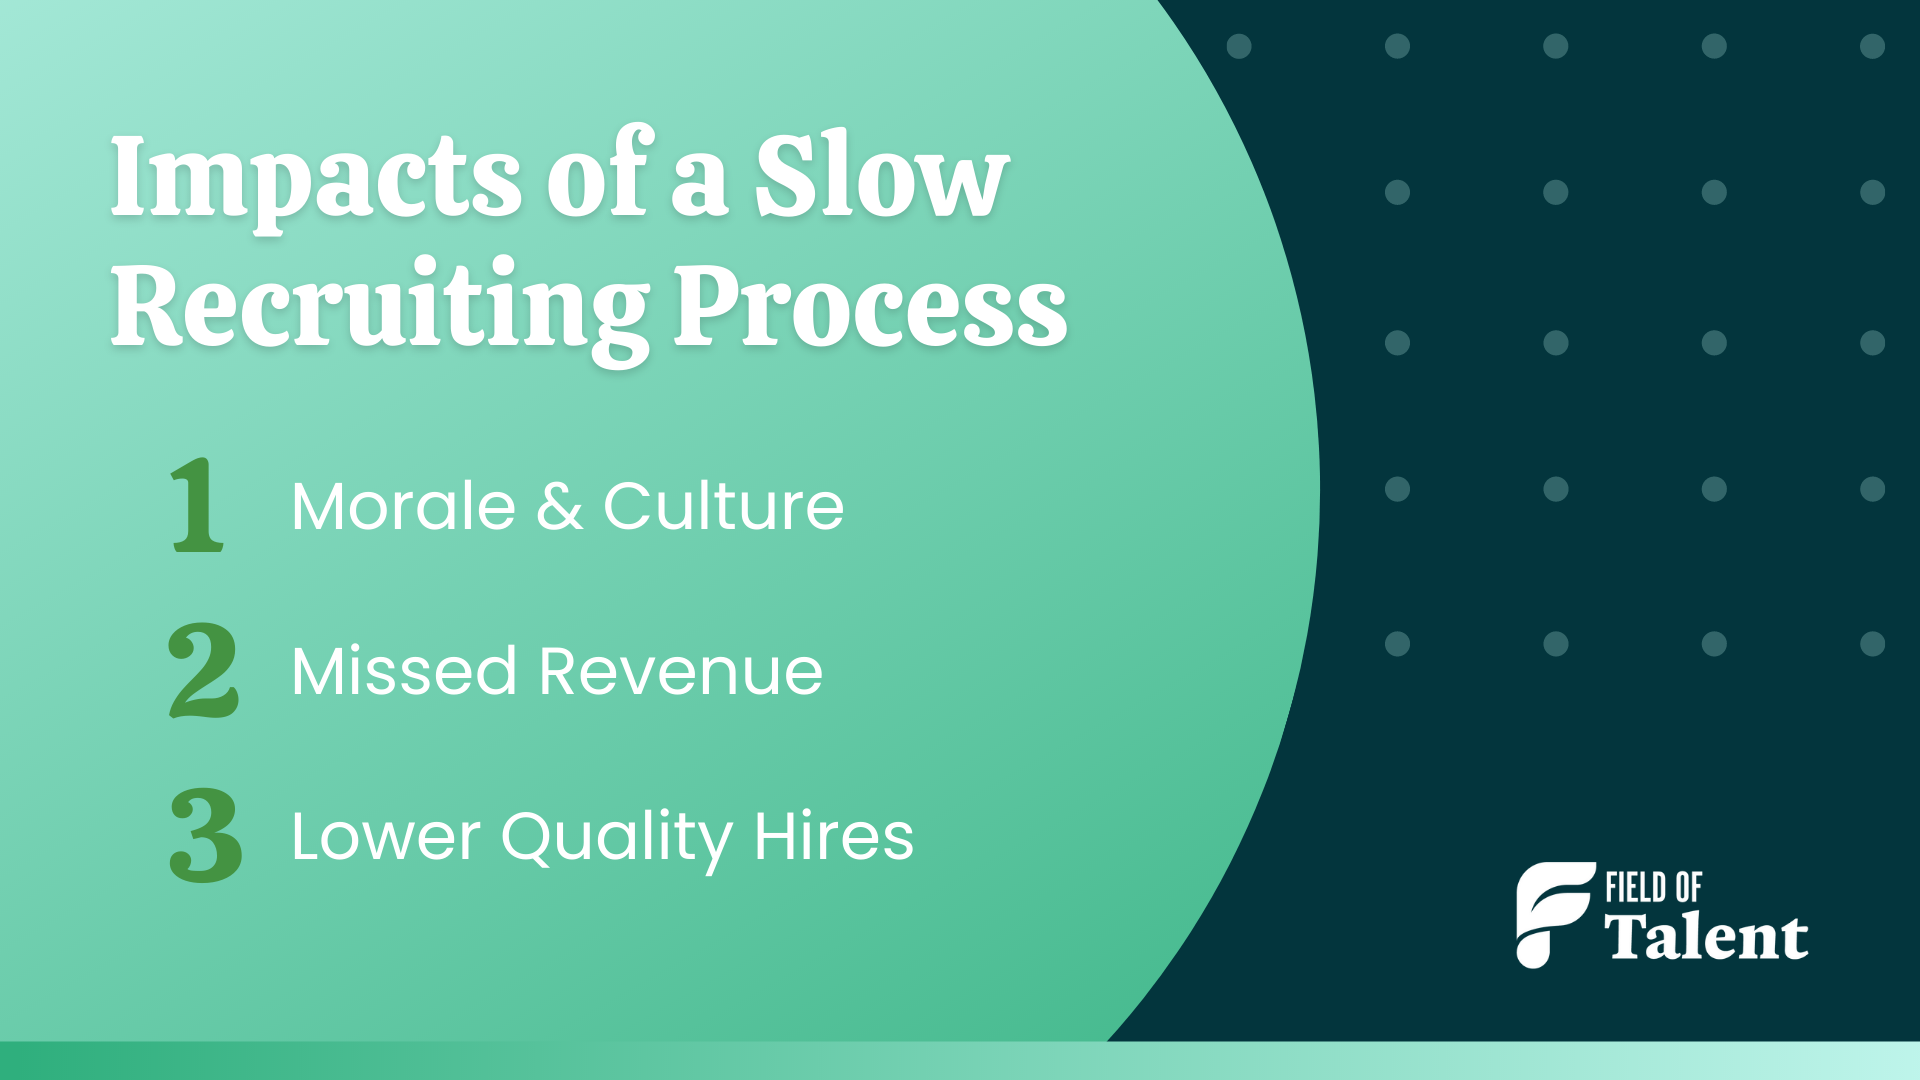 Impacts of a Slow Recruiting Process